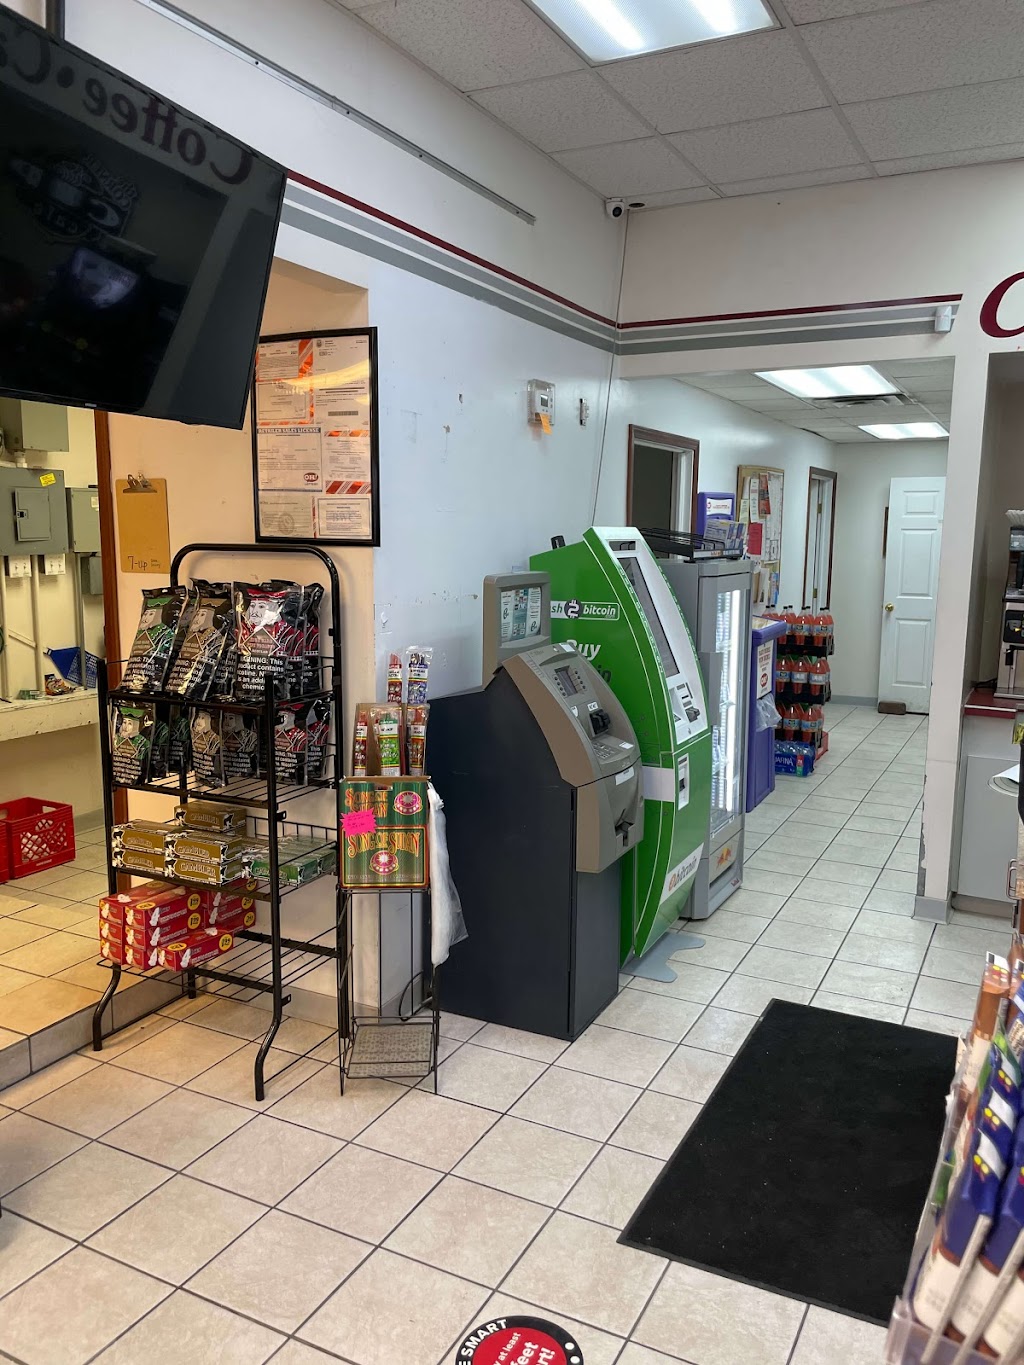 Cash2Bitcoin ATM | 602 E Perry St, Paulding, OH 45879, USA | Phone: (888) 897-9792